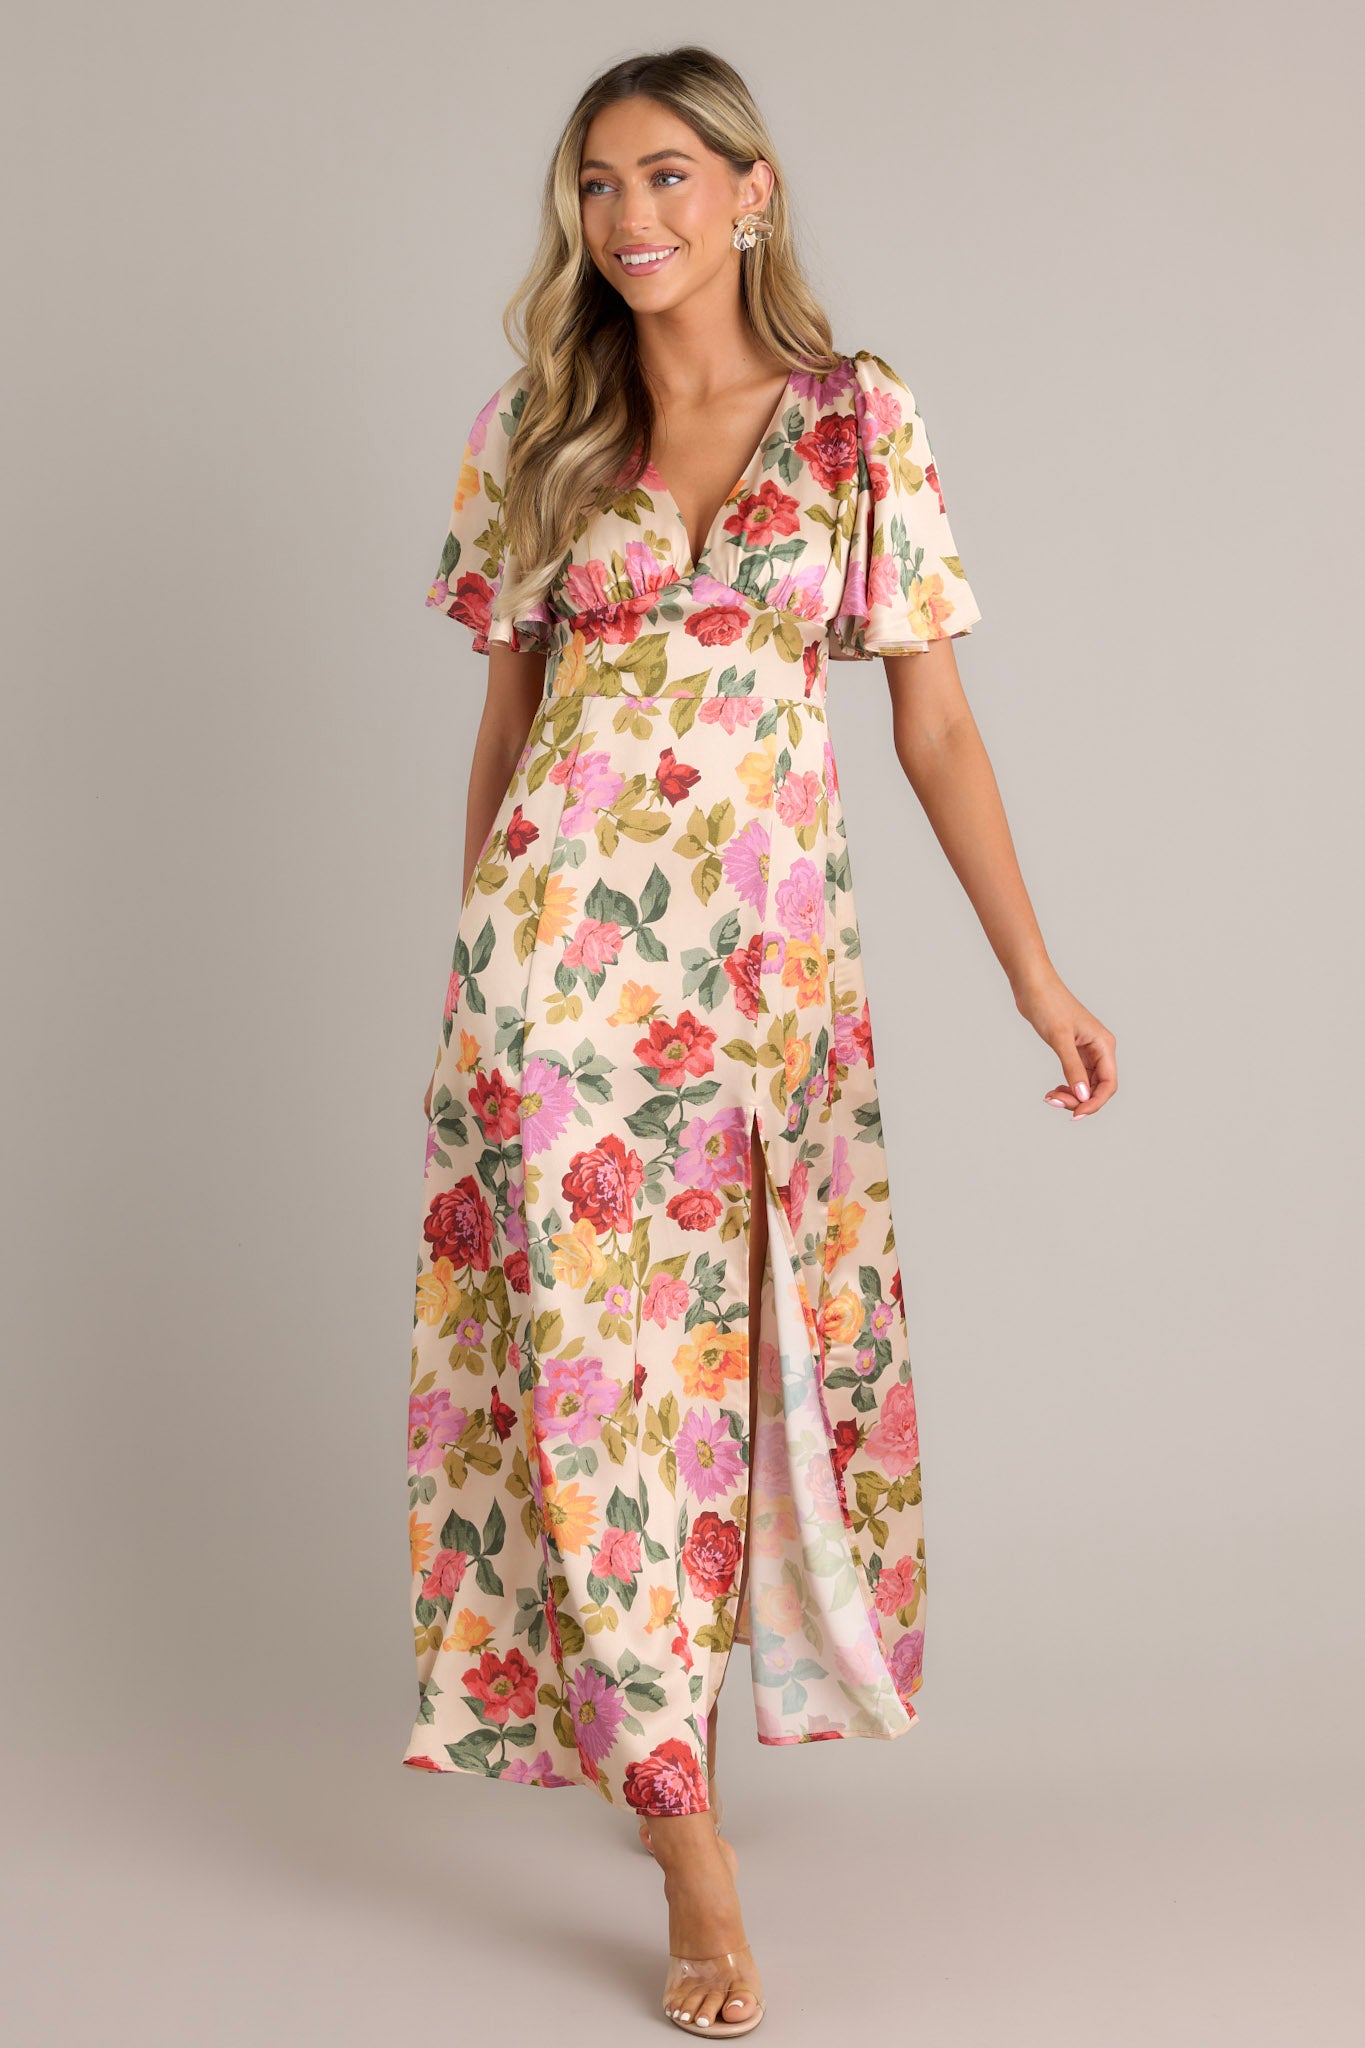 This maxi dress features a deep V-neckline, flutter sleeves, a fitted waist, A-line skirt, and a warm floral print with a subtle front slit.